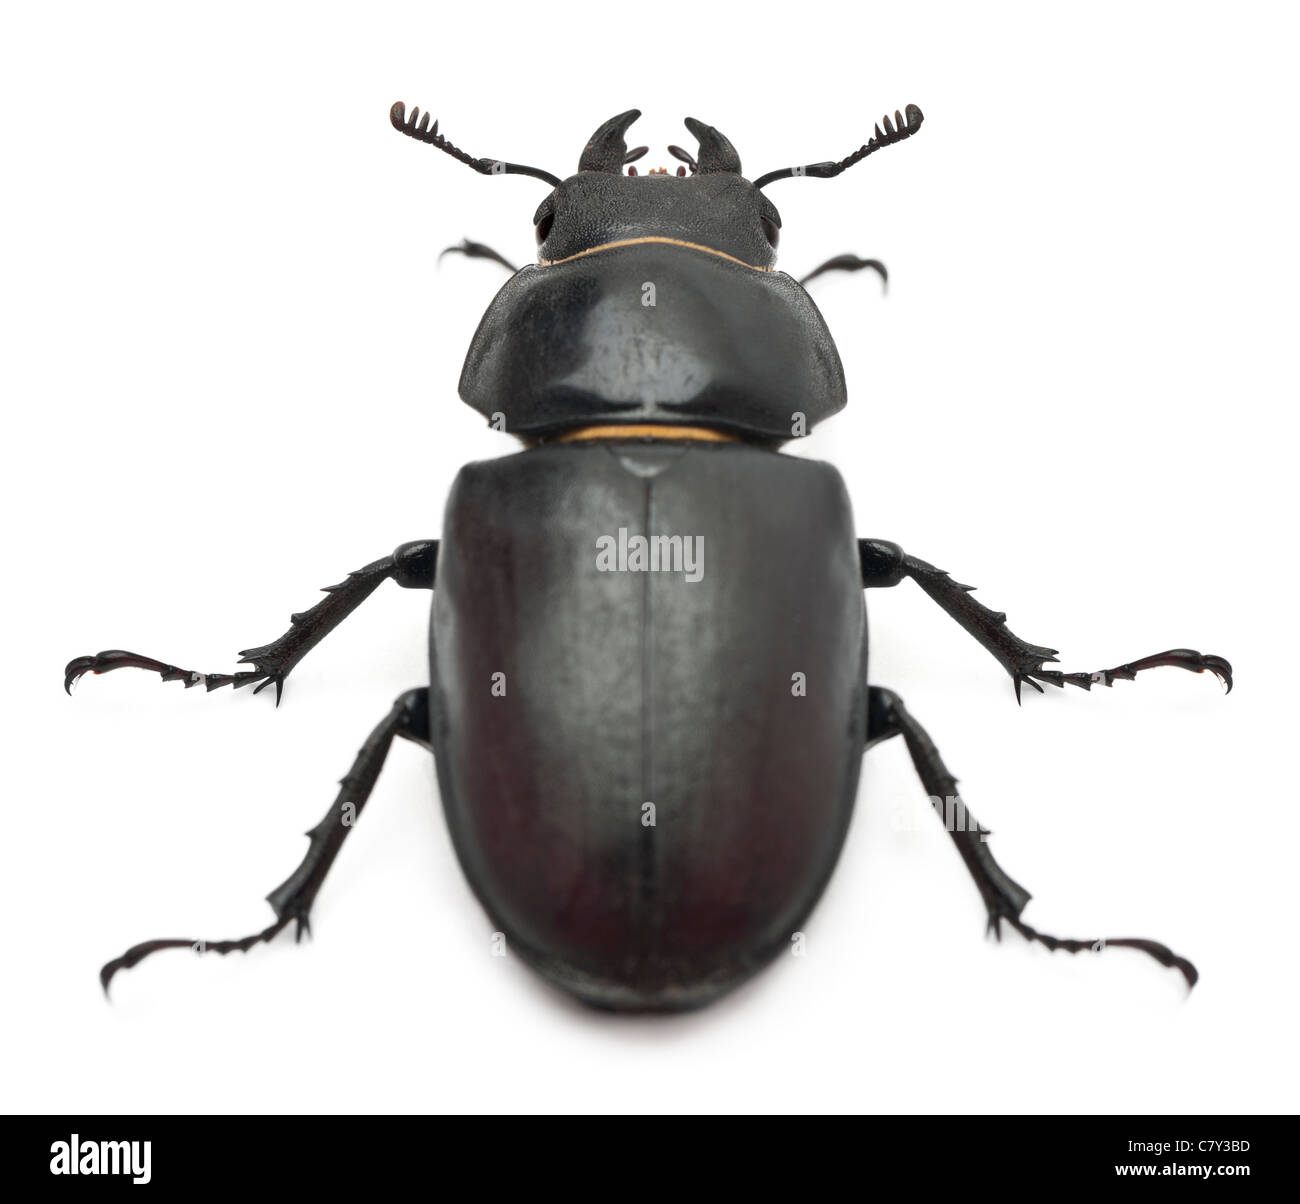 Female Lucanus cervus, a species of stag beetle, in front of white background Stock Photo